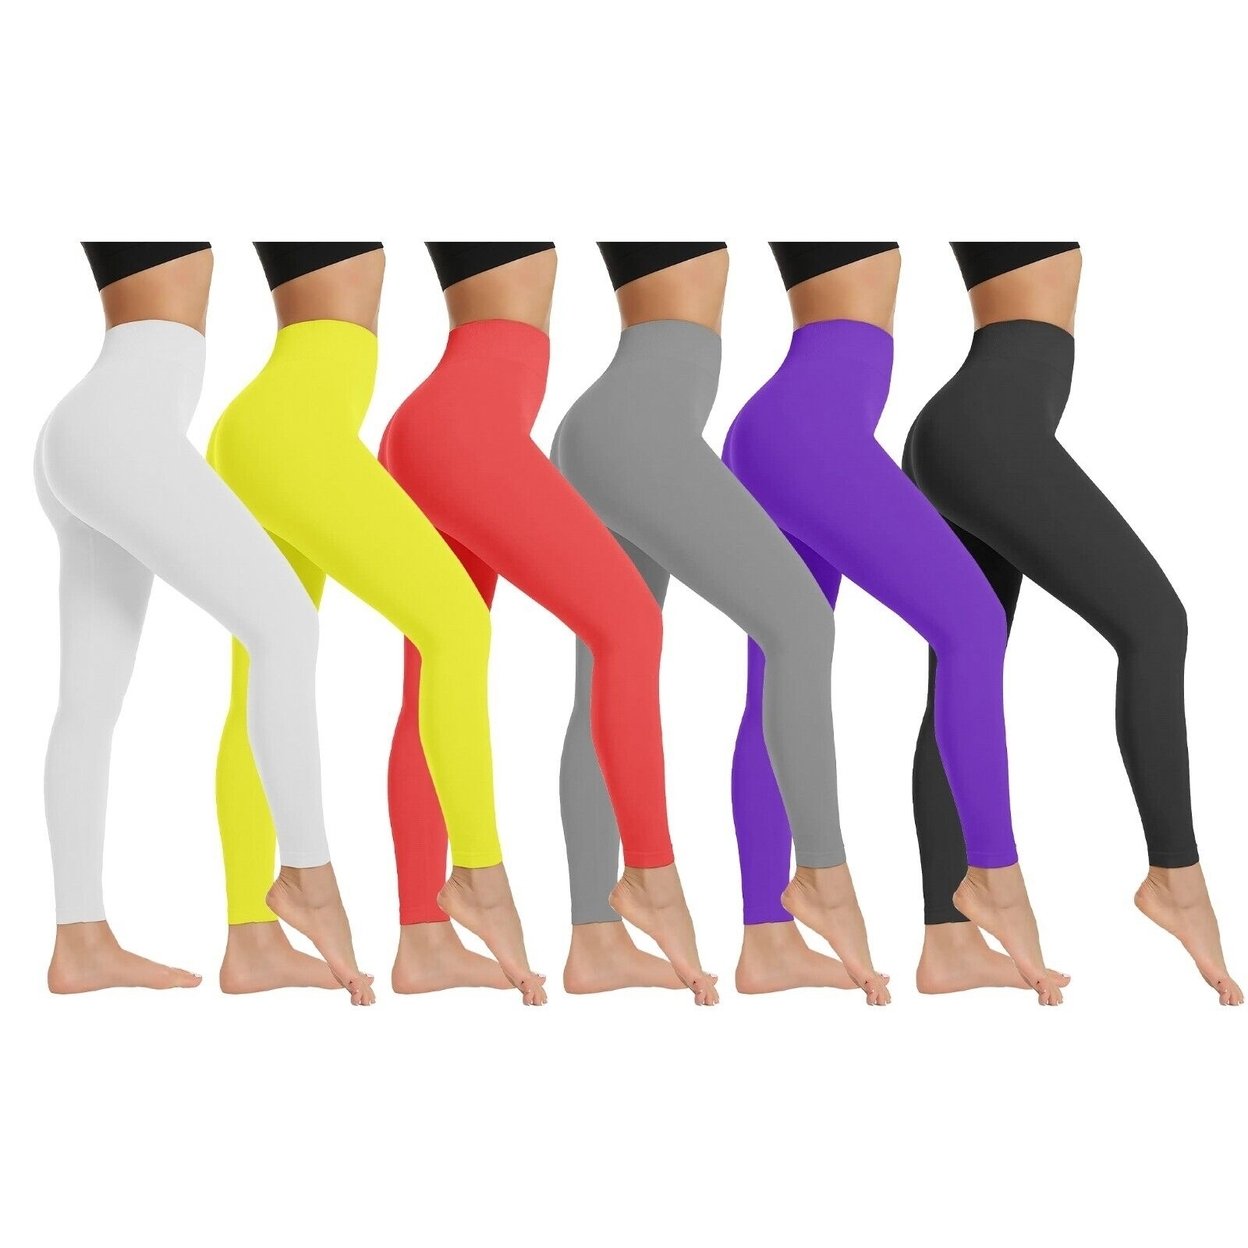 2-Pack: Women's High Waist Super Soft Active Athlete Stretch Yoga Cozy Leggings - Yellow & Yellow, Large